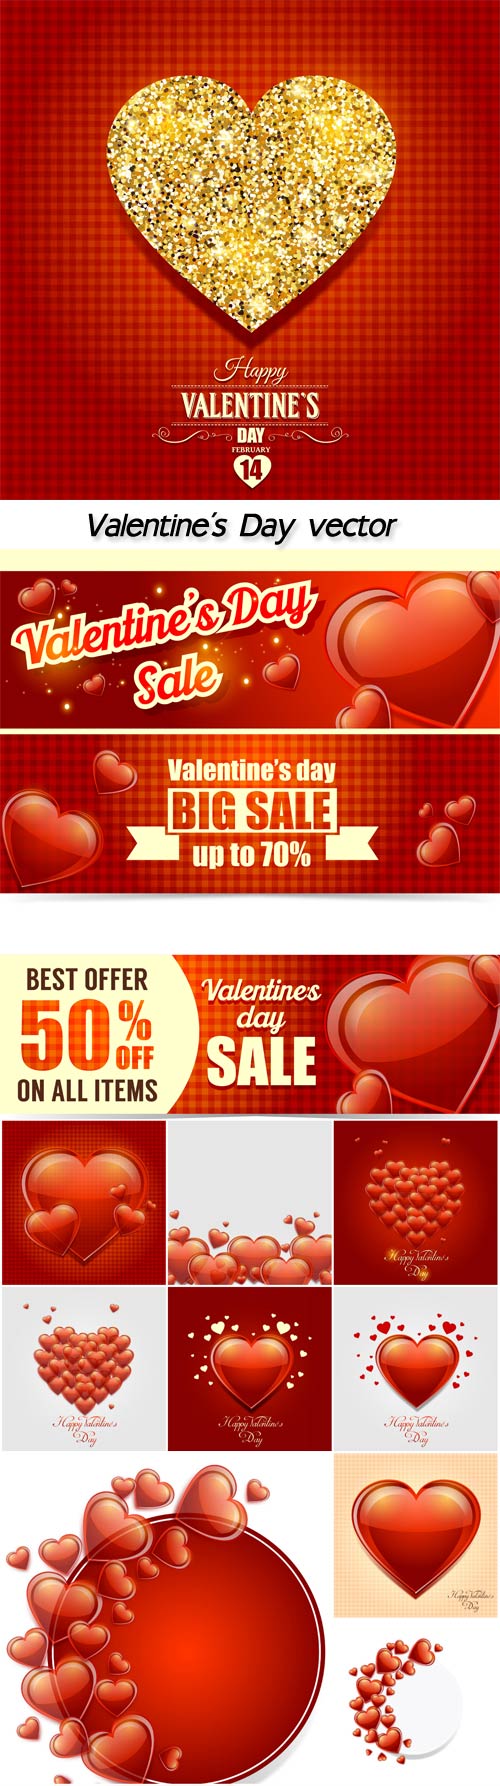 Valentine's Day, red hearts, vector backgrounds